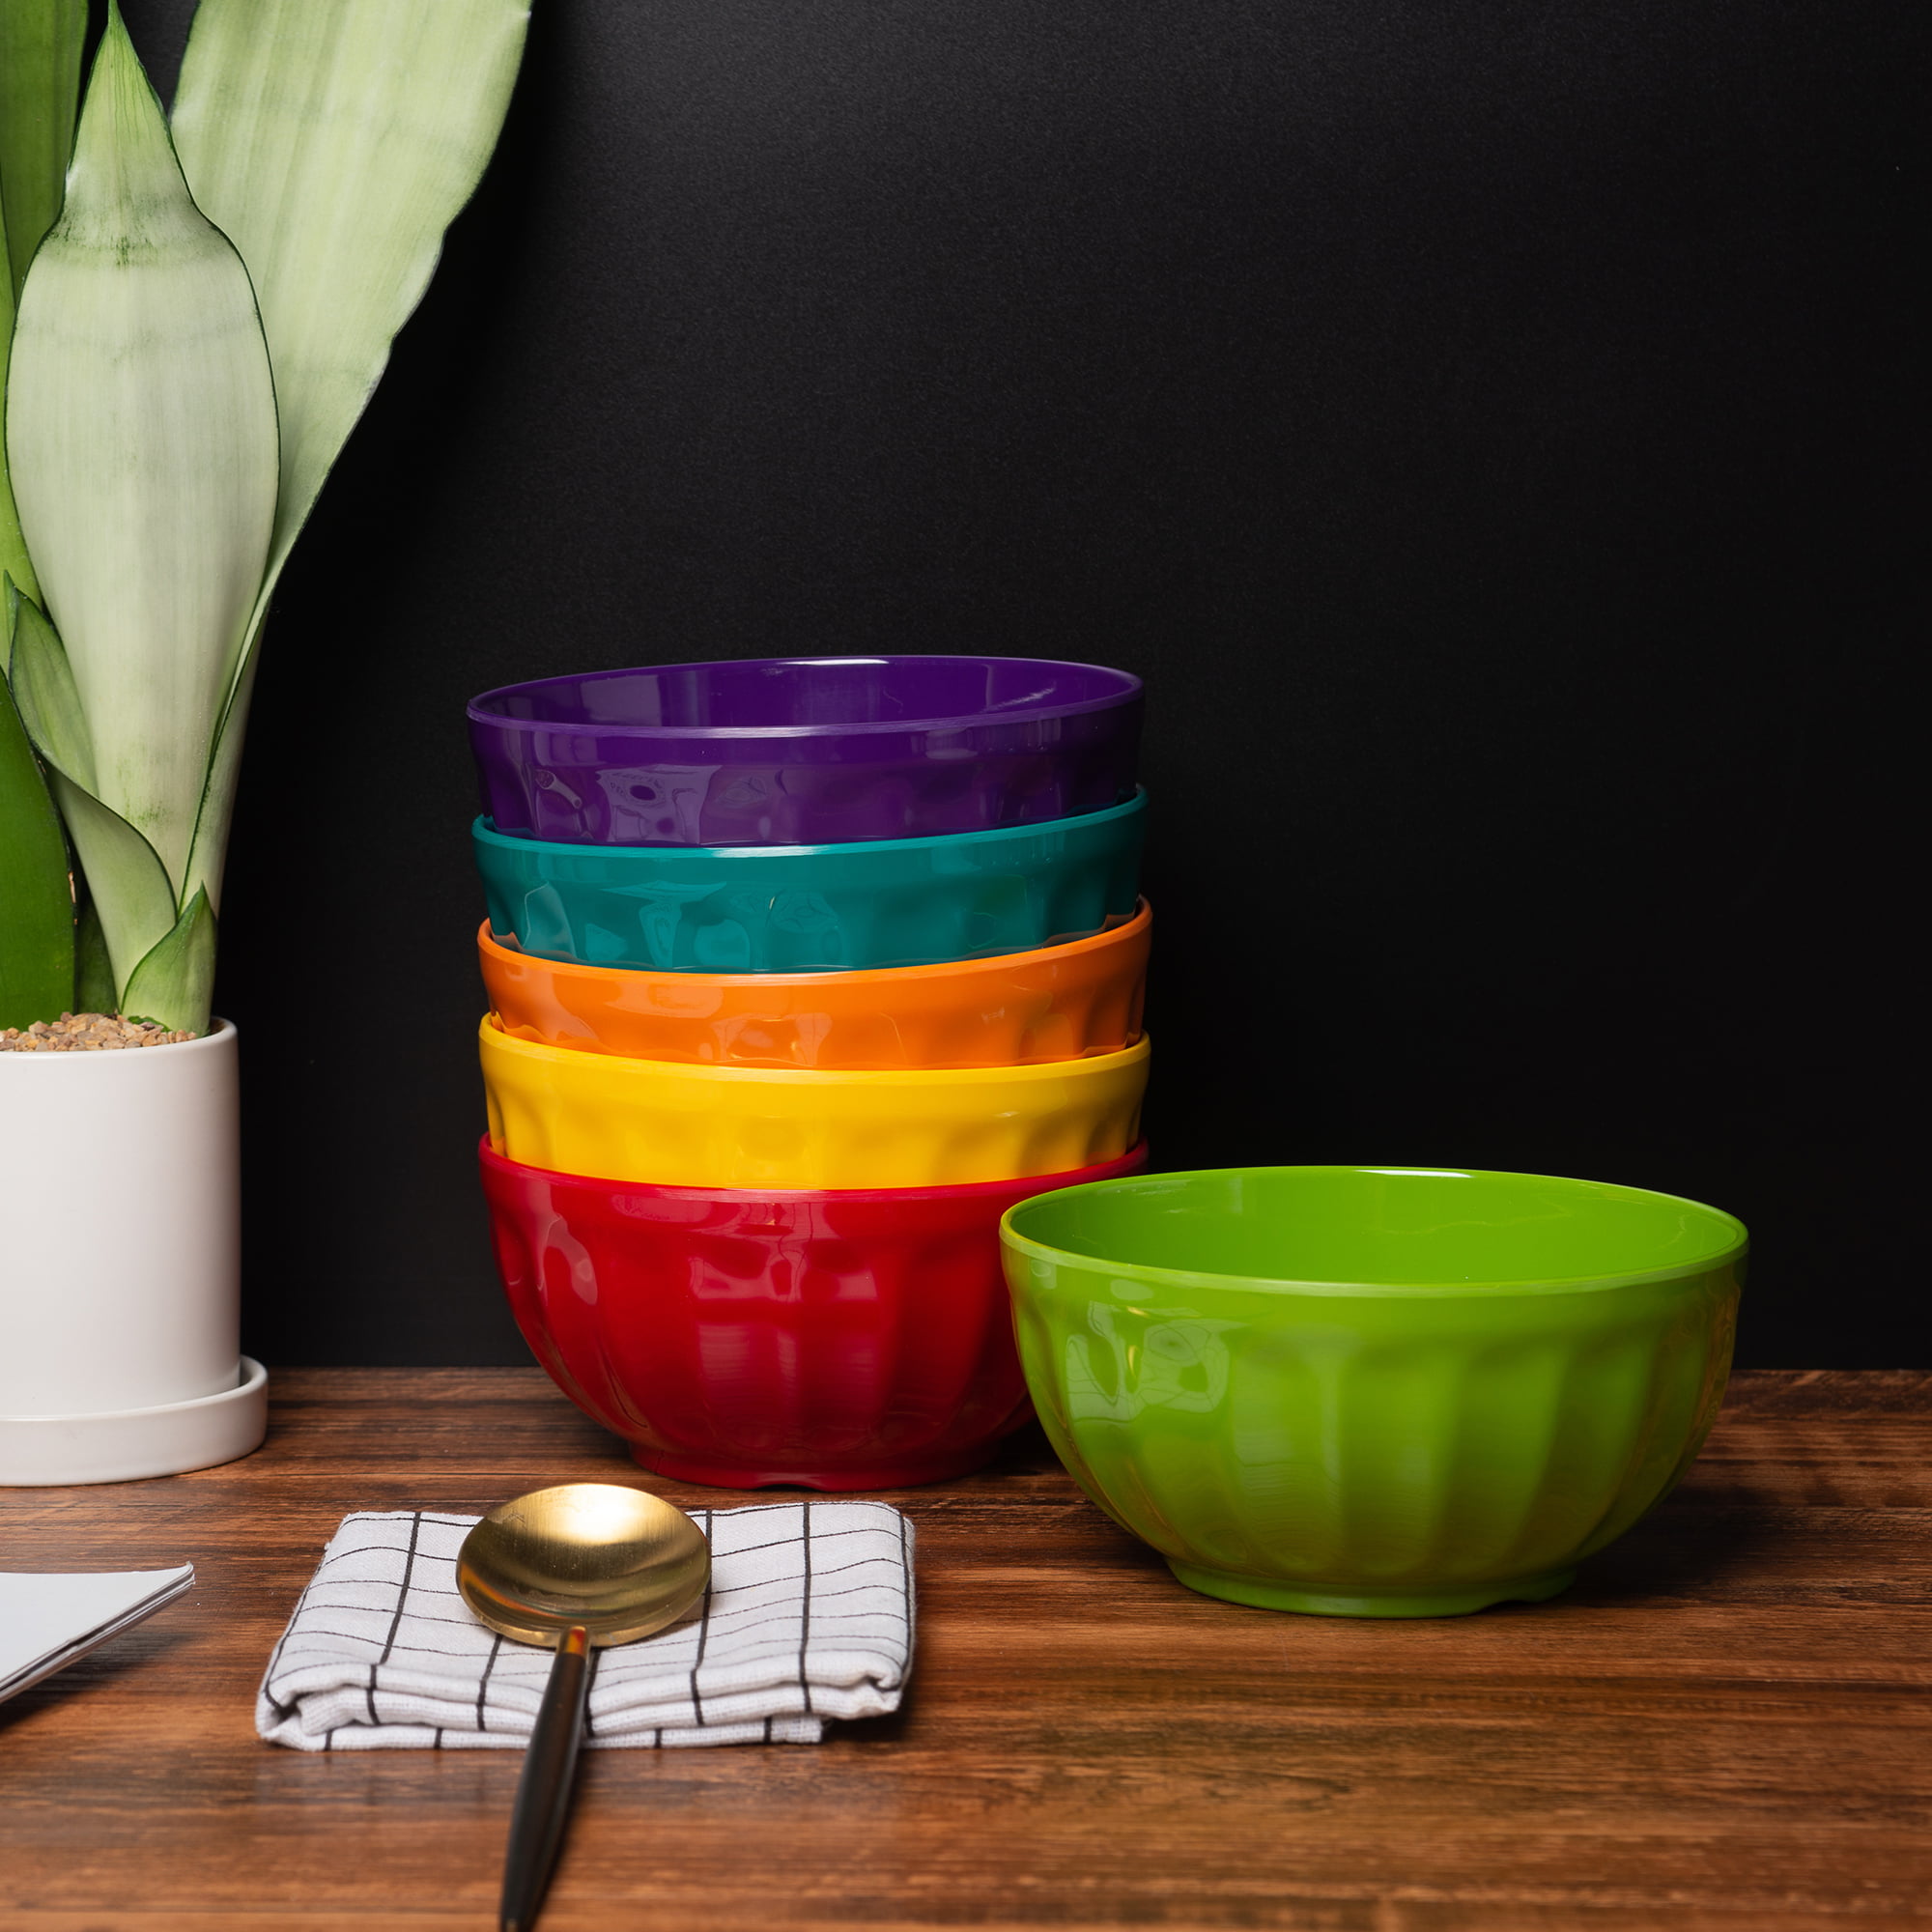 KX-WARE Plastic Bowls with Lids Set of 6 - Unbreakable and Reusable 6-Inch Plastic Cereal/Soup/Salad Bowls Multicolor, Microwave/Dishwasher Safe